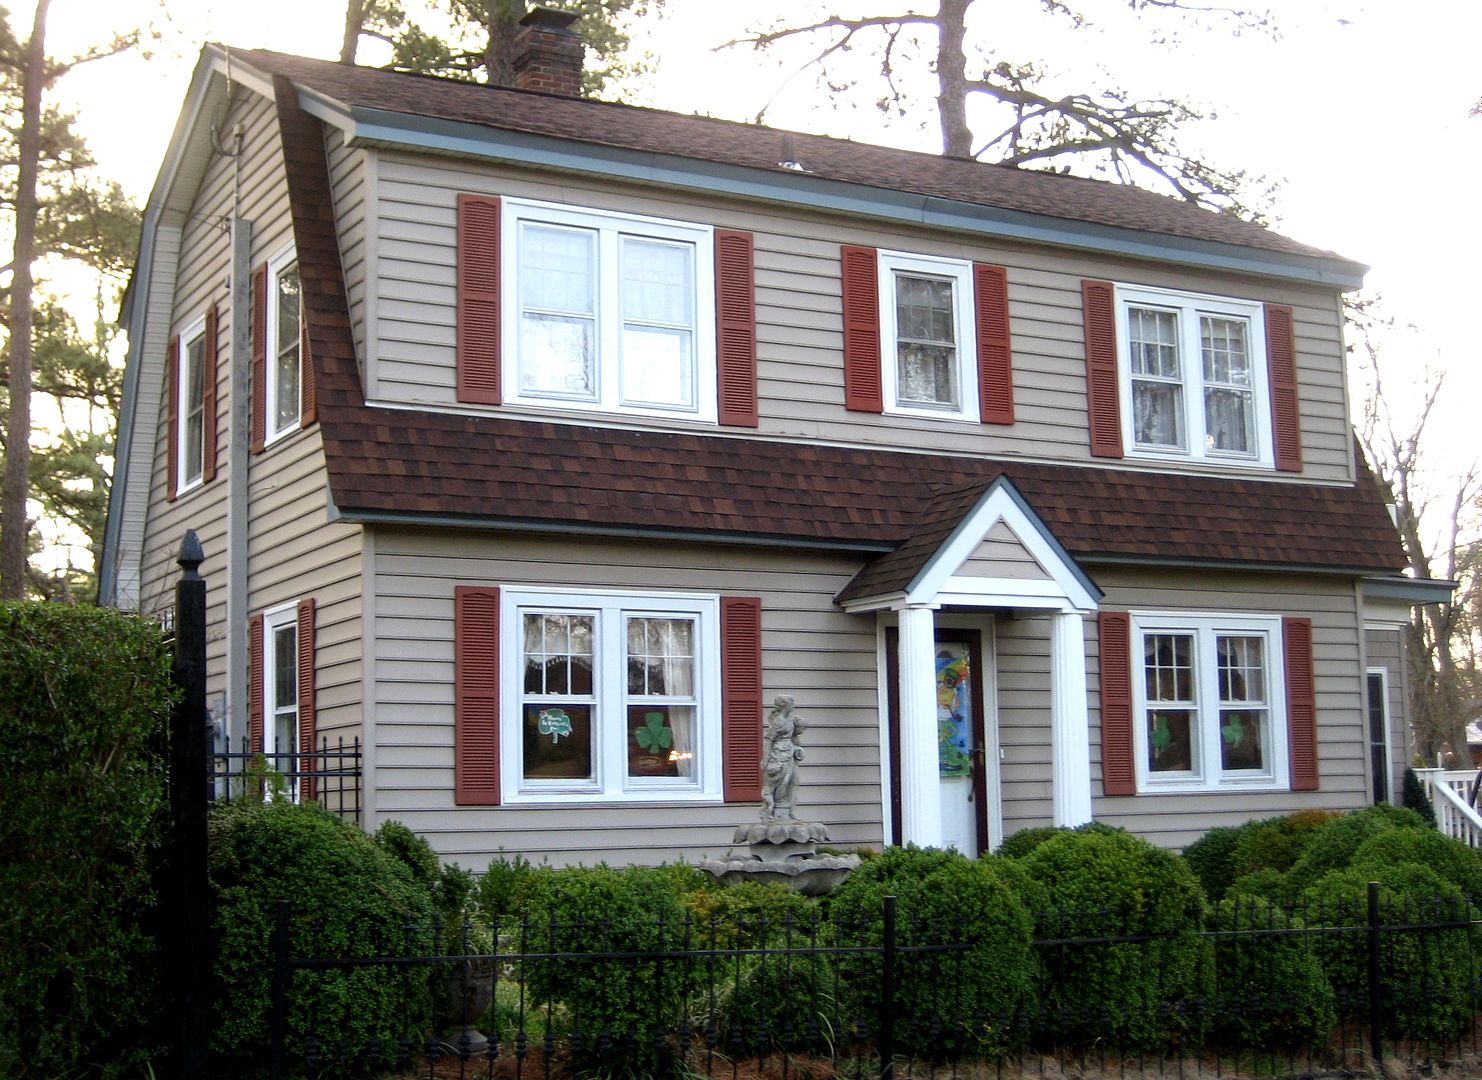 This Dutch Colonial in Hopewell is a fine house but its not a Van Jean. 